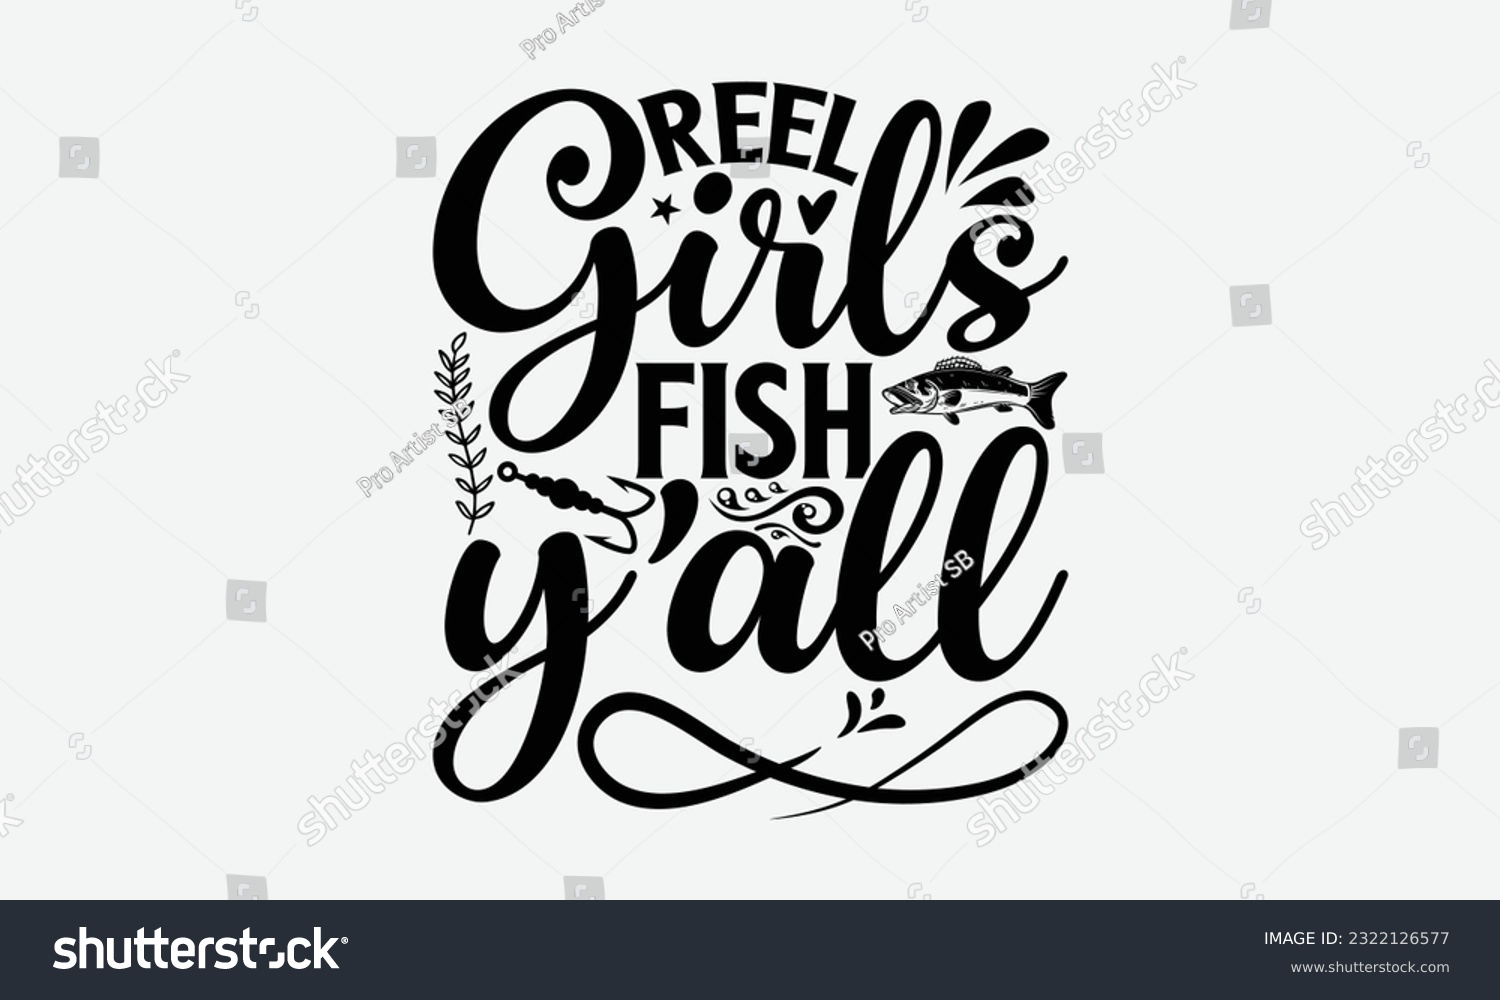 SVG of Reel Girls Fish Y’all - Fishing SVG Design, Isolated On White Background, For Cutting Machine, Silhouette Cameo, Cricut. svg